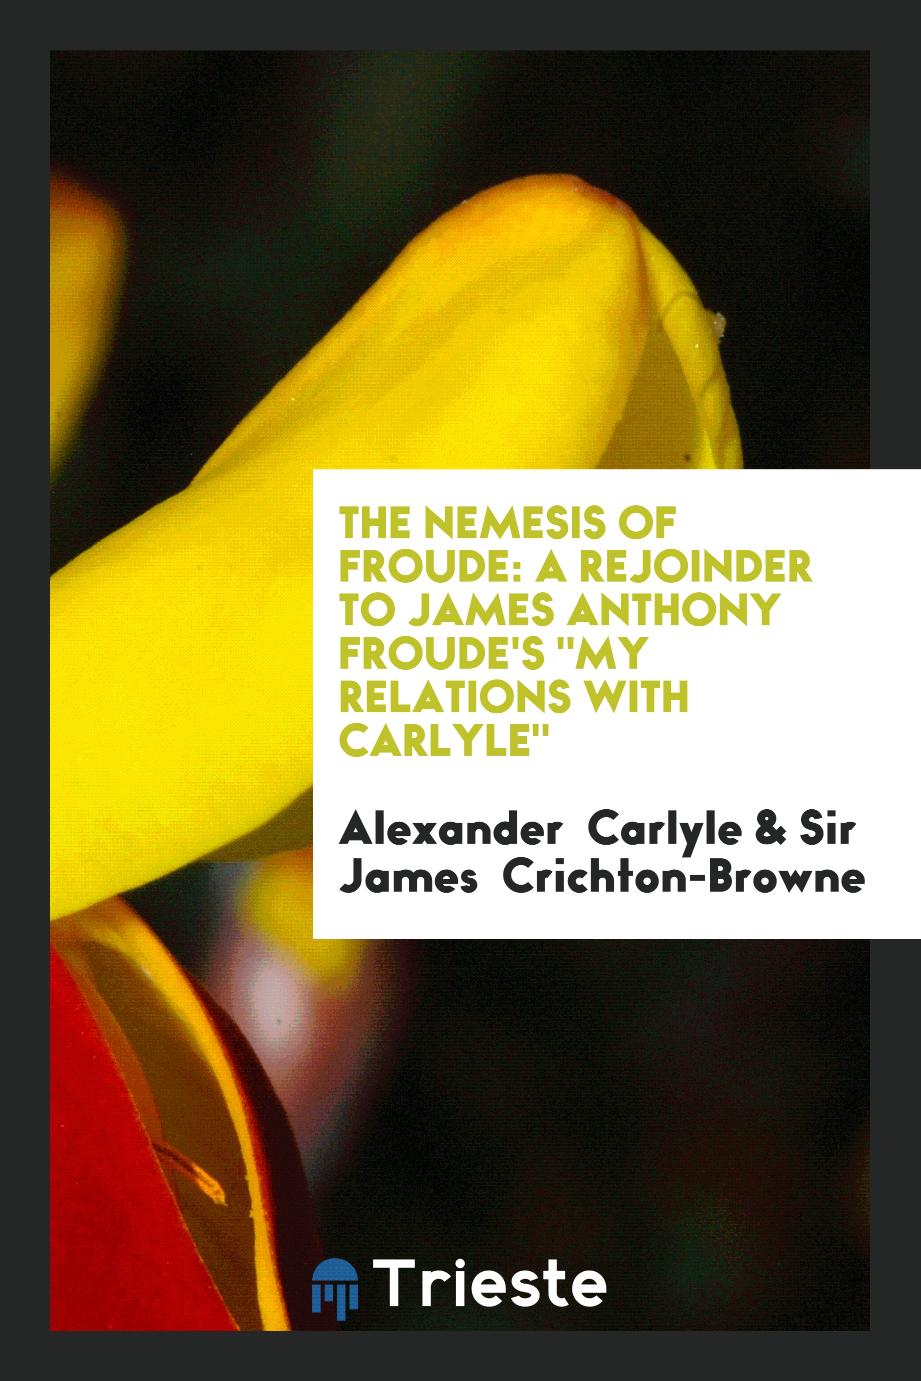 The Nemesis of Froude: A Rejoinder to James Anthony Froude's "My Relations with Carlyle"